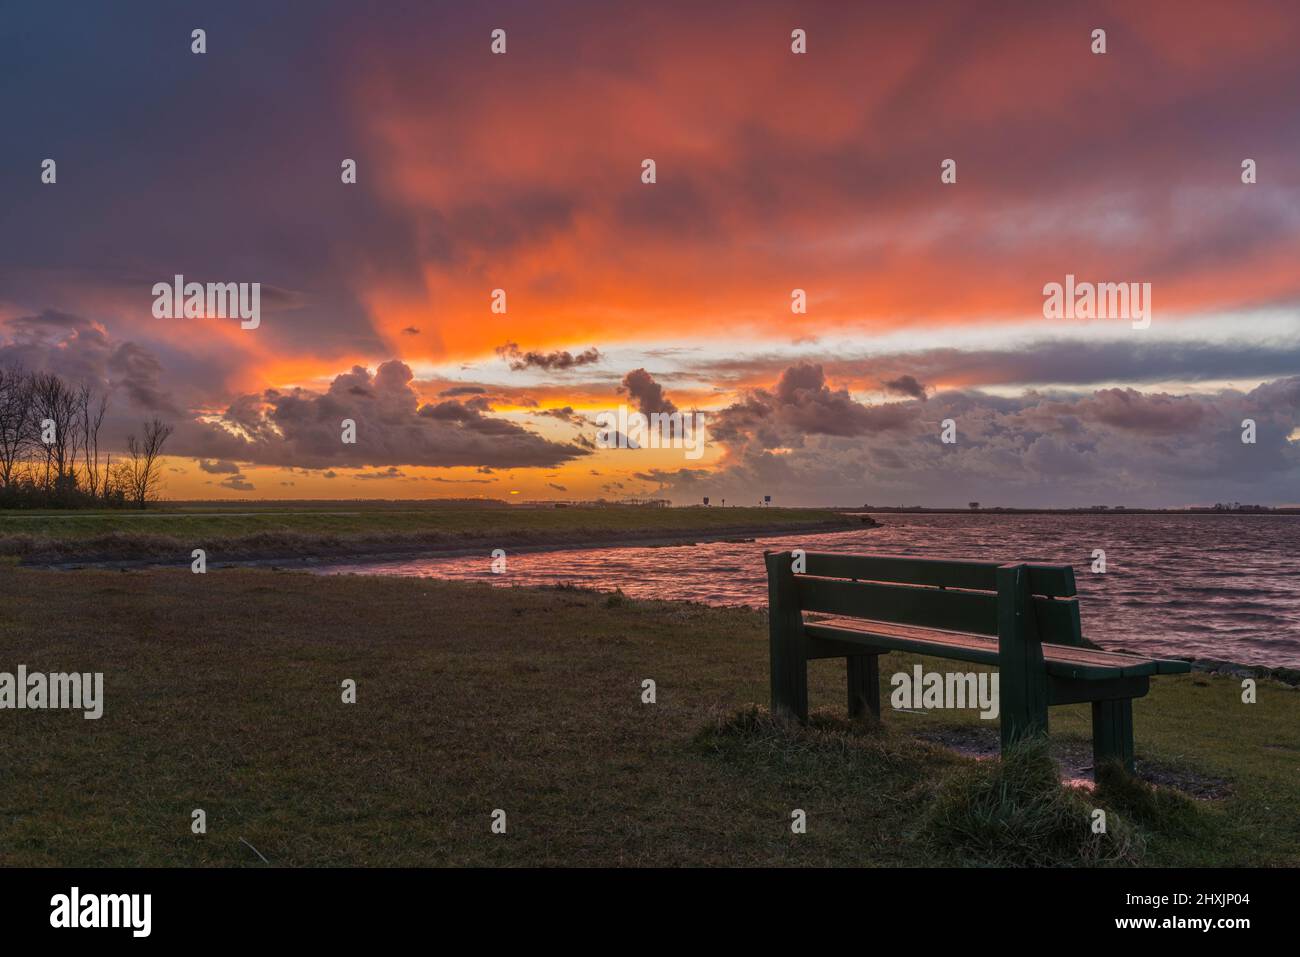 Dramatic thunderstorm clouds approaching a bench on the Veerse Meer at sunset. Zeeland, Netherlands Stock Photo